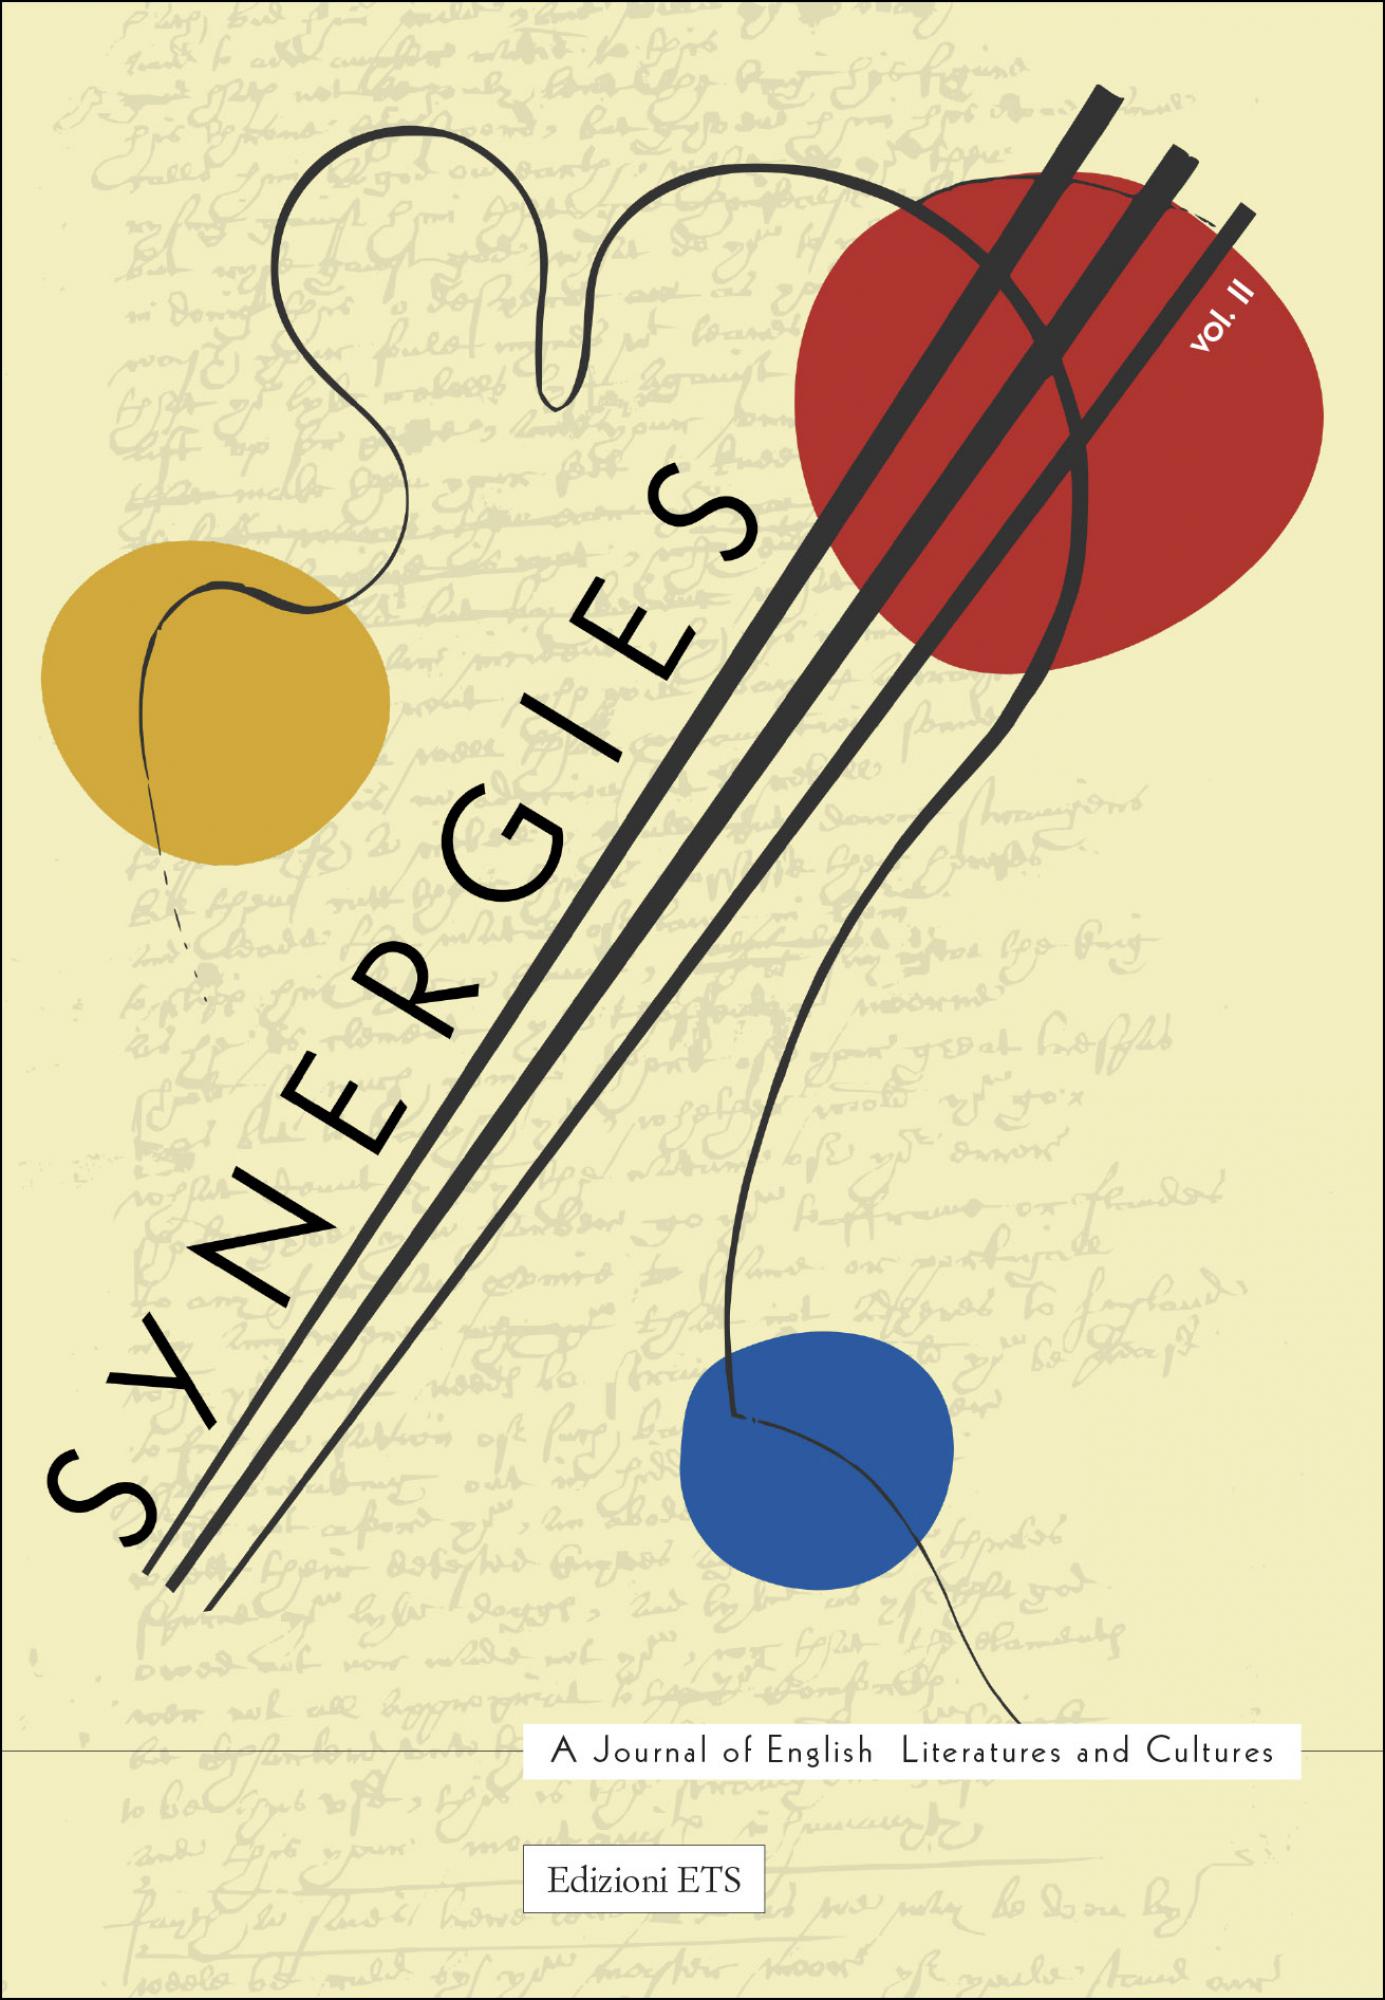 Synergies / II, 2021.A Journal of English Literatures and Cultures